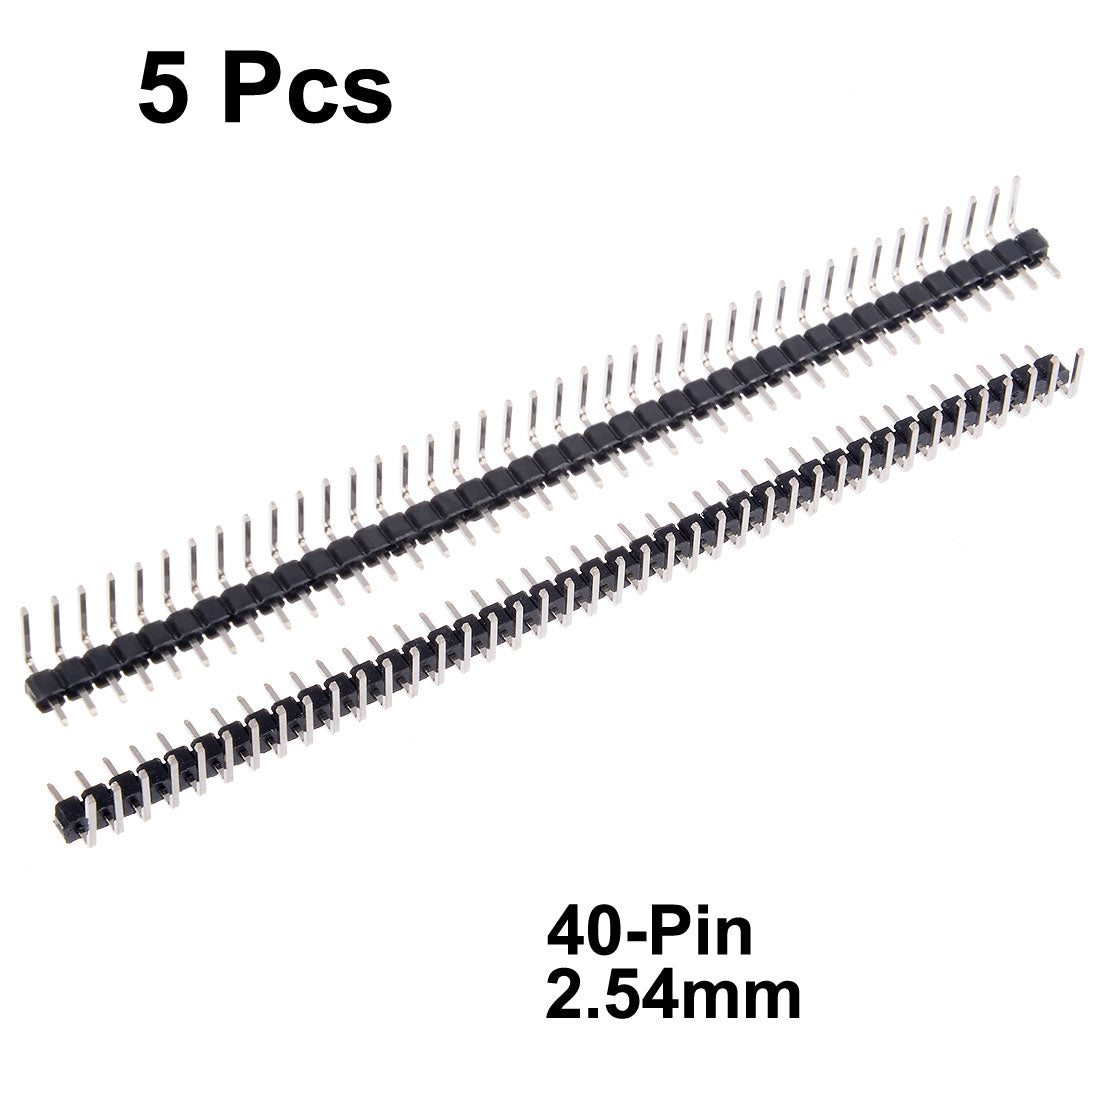 uxcell Uxcell 5Pcs 2.54mm Pitch 40P Single Row Curved Connector Pin Header Strip for Arduino Prototype Shield